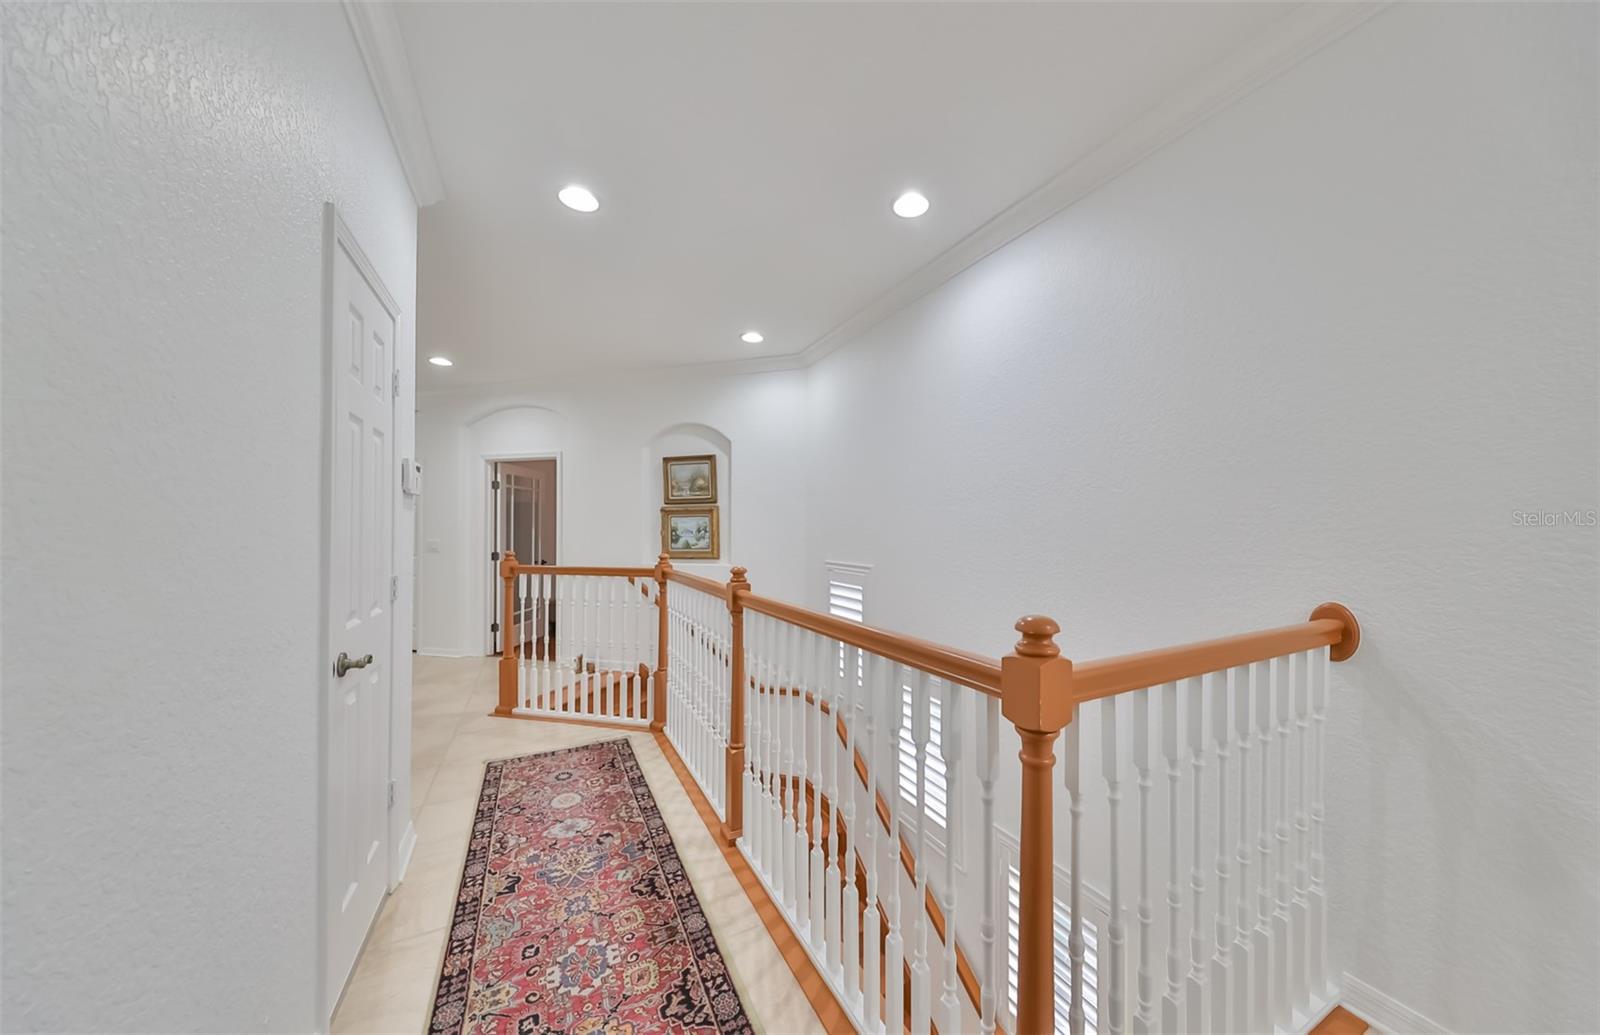 From the landing, a hallway provides additional closet space and access to the private elevator.